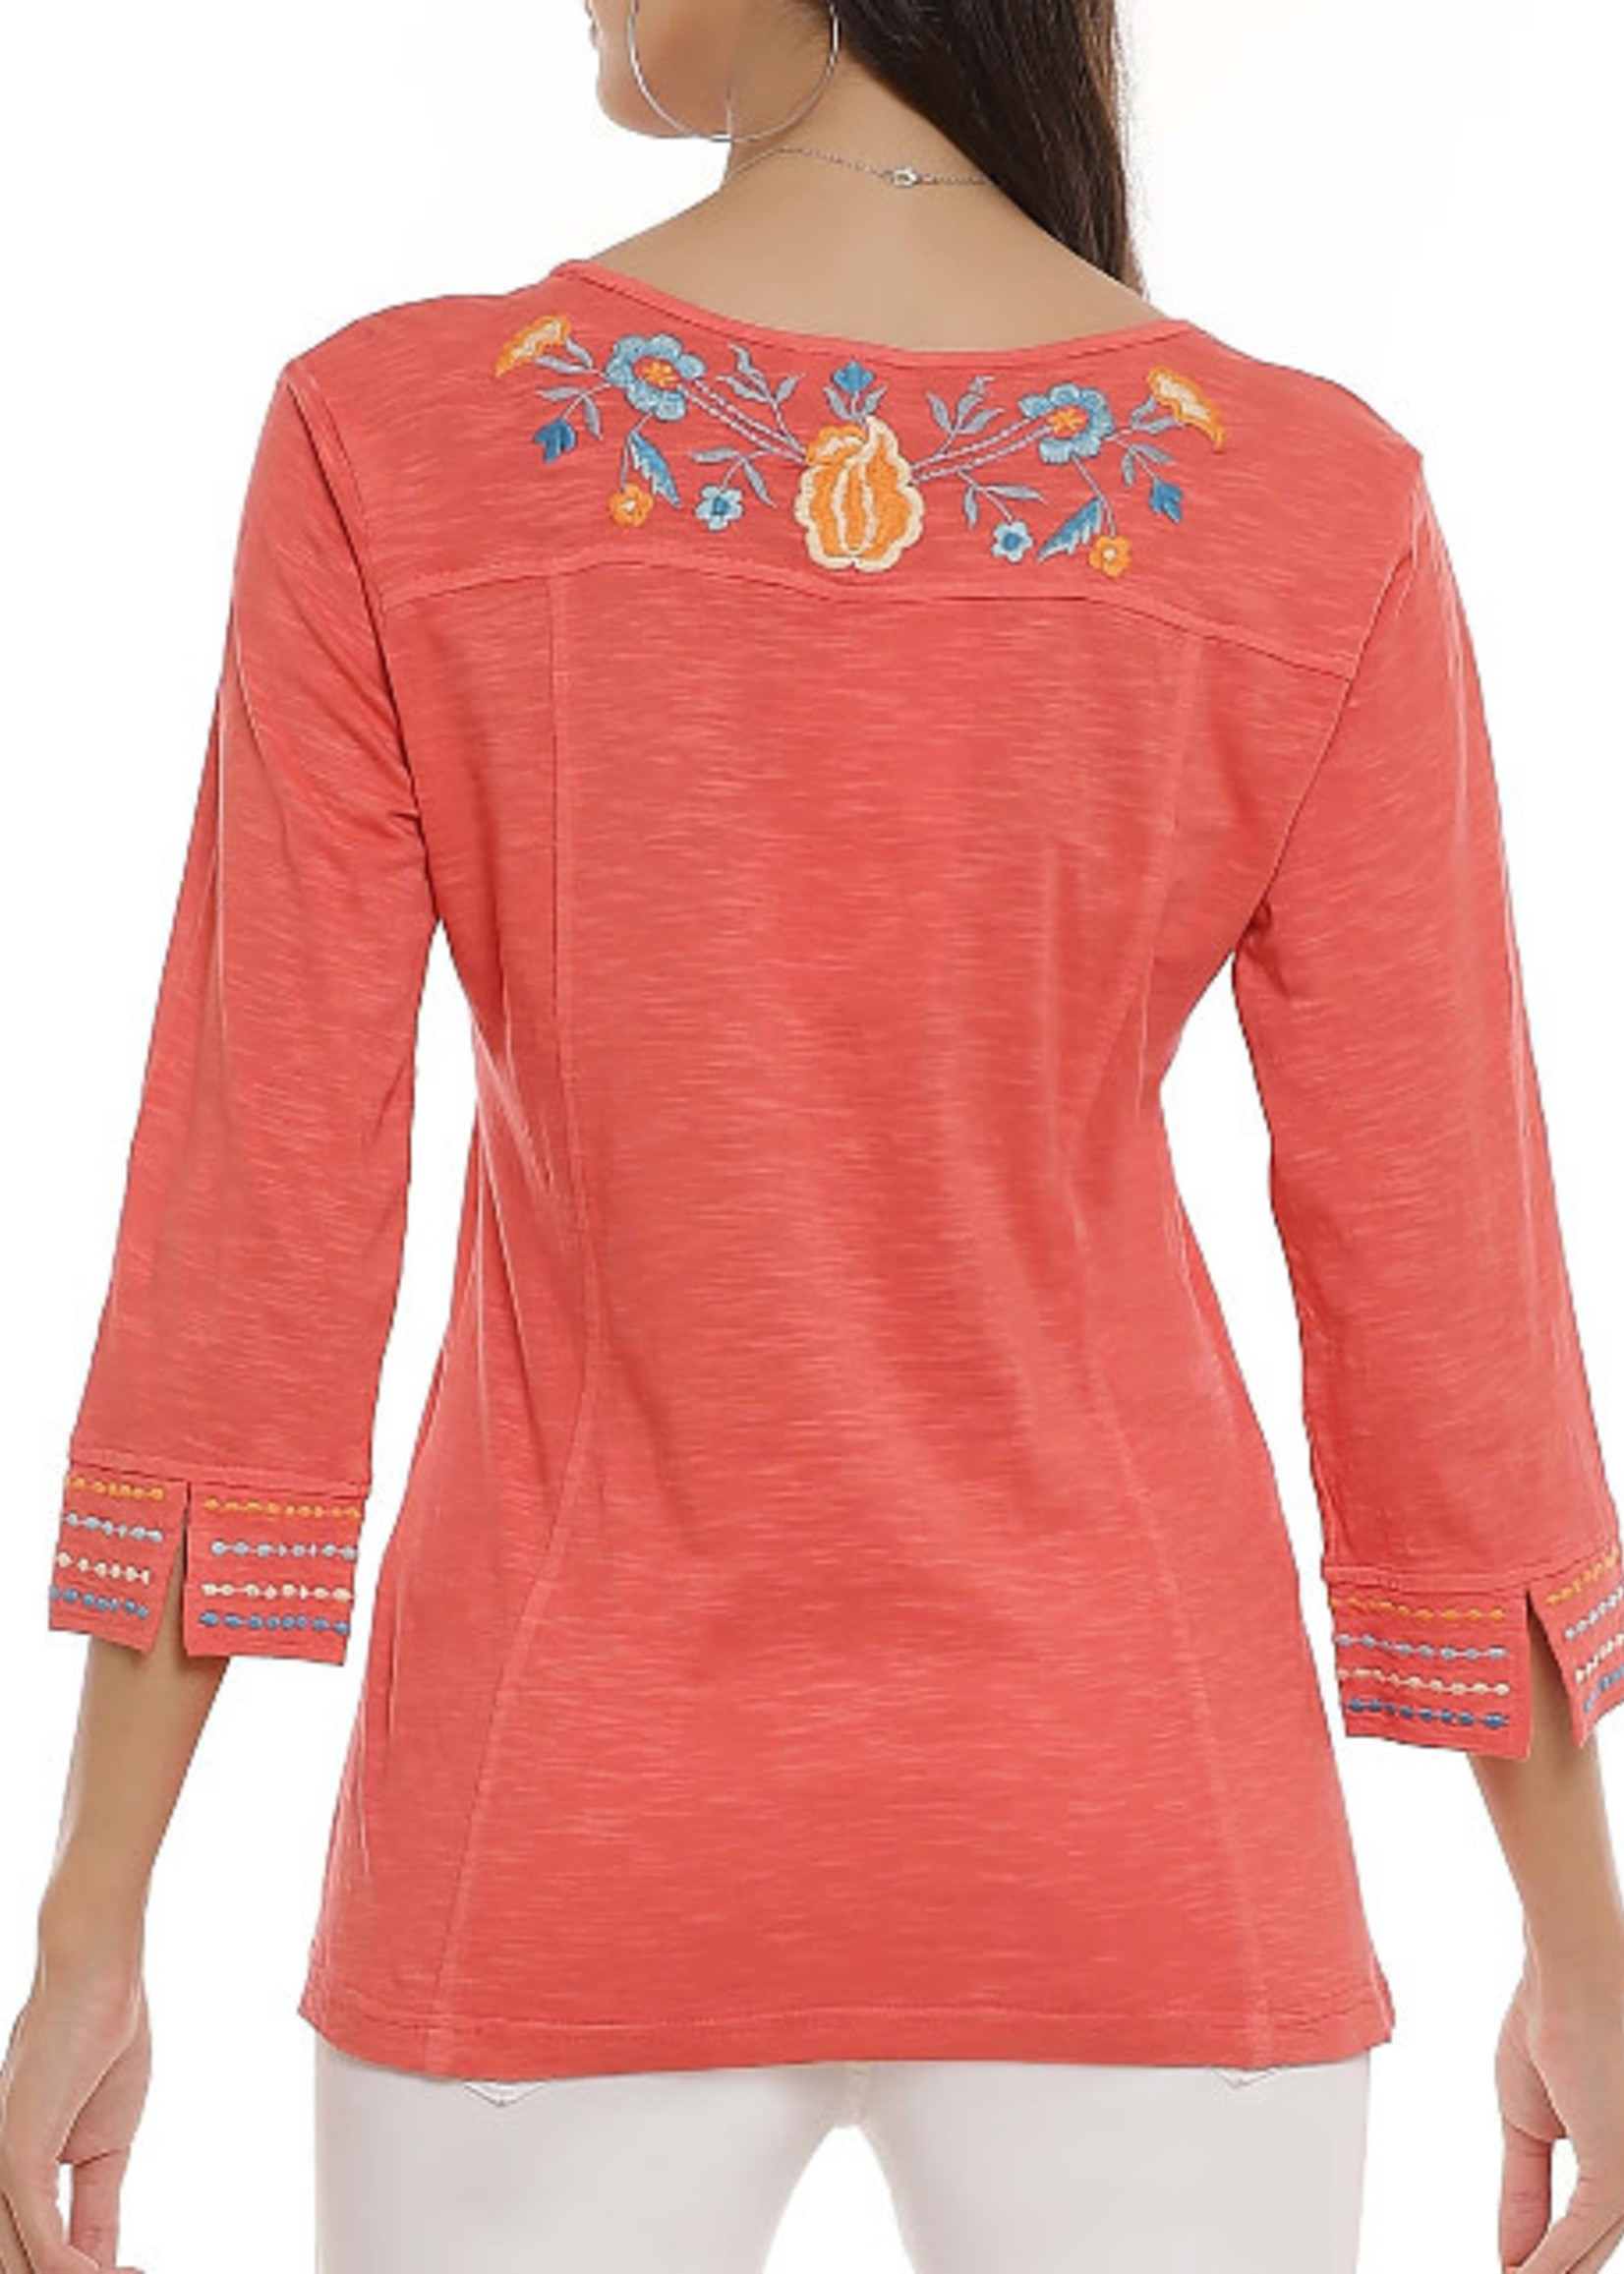 Parsley and Sage Coral Floral Embroidered Crew Neck Shirt